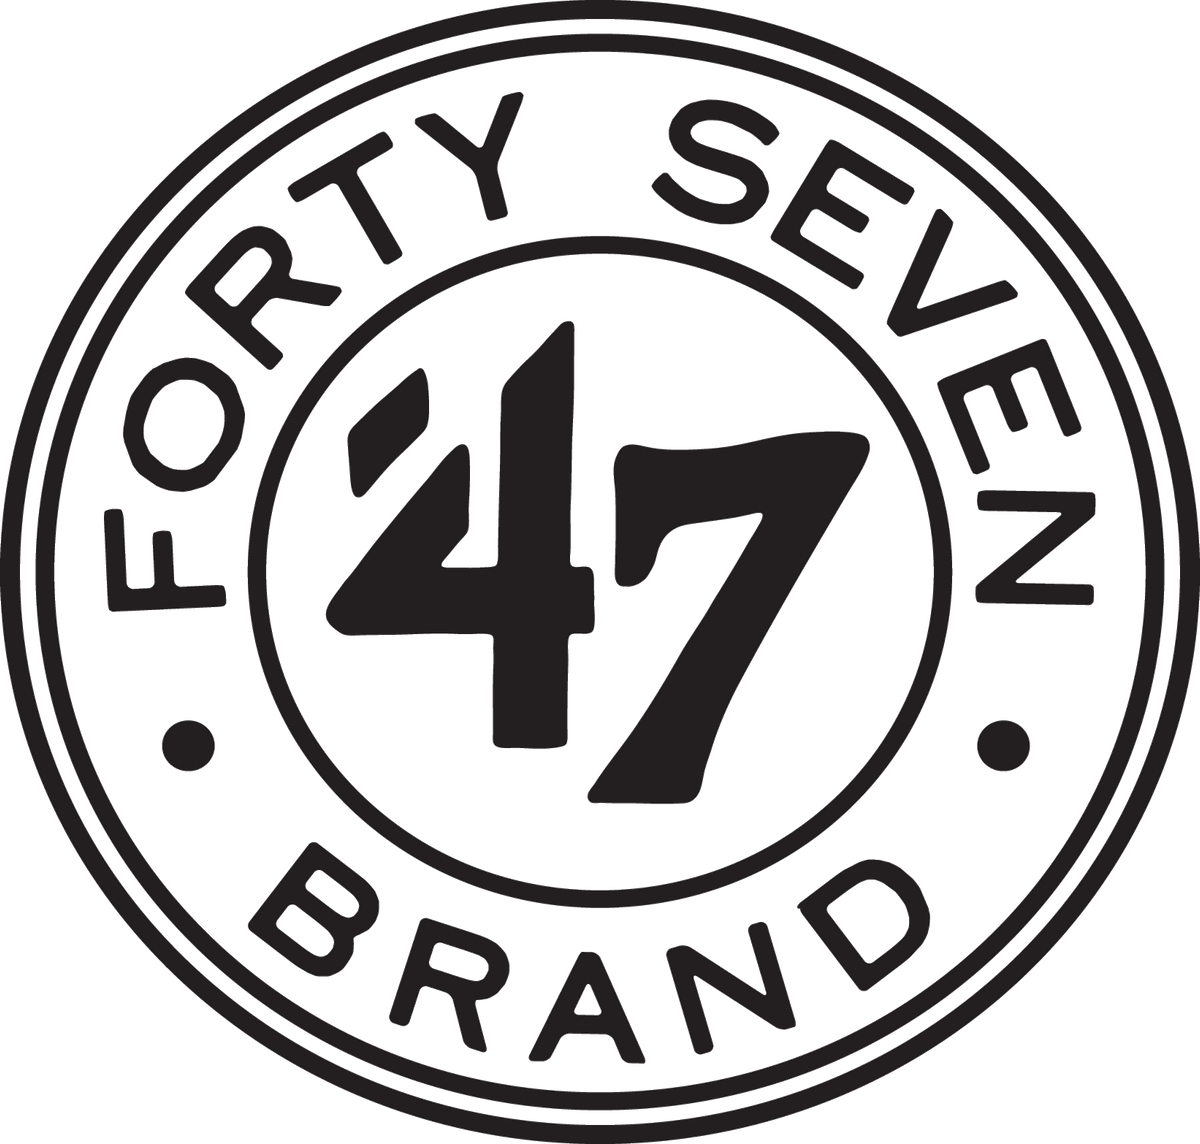 Productos 47 Brand